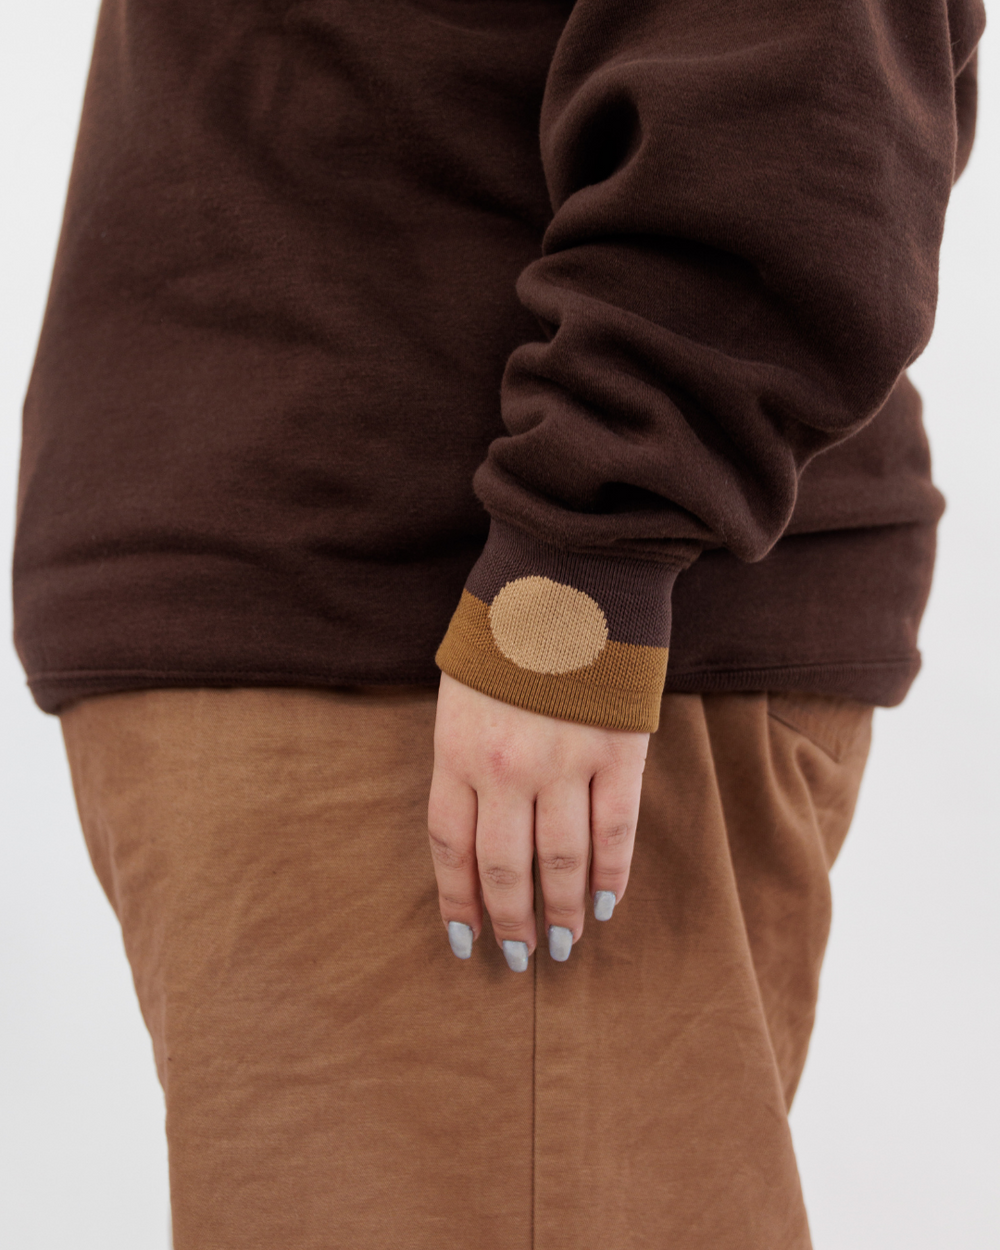 Clothing The Gaps. Chocolate Crew Jumper. Brown chocolate crew neck jumper. With tonal lighter brown 'Clothing the gaps' and the word 'Narrm' embroidered on the front of crewneck.' Wear your values' is also embroidered small on the back of the crew with the same light brown tonal colour. The wrist cuffs of the crew have a woven tonal brown aboriginal flag on them. 